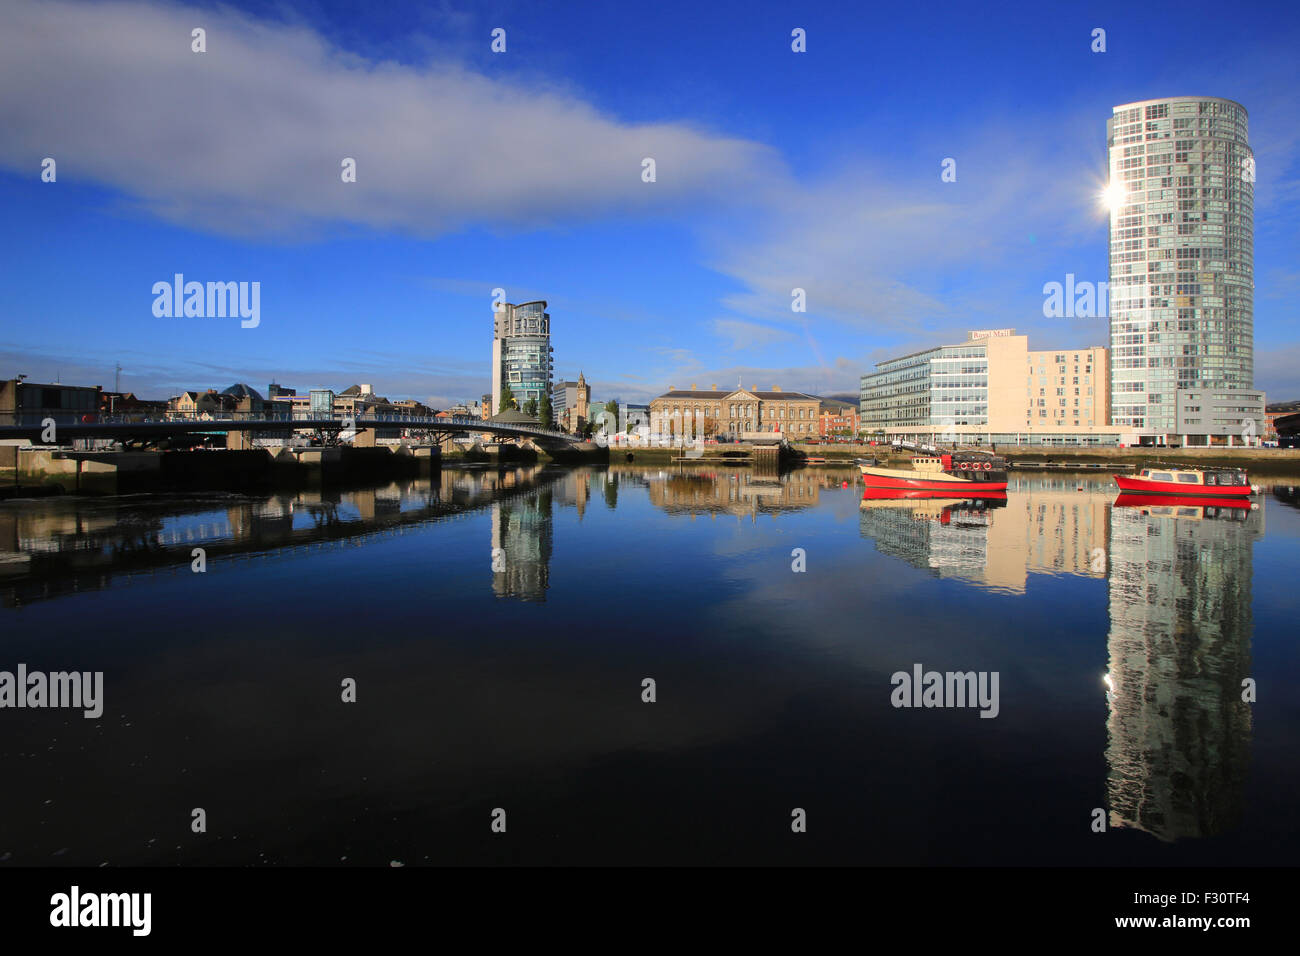 Belfast (/ˈbɛl.fɑːst/ or /ˈbɛl.fæst/; from Irish: Béal Feirste, meaning 'mouth of the sandbanks')[11] is the capital and largest Stock Photo